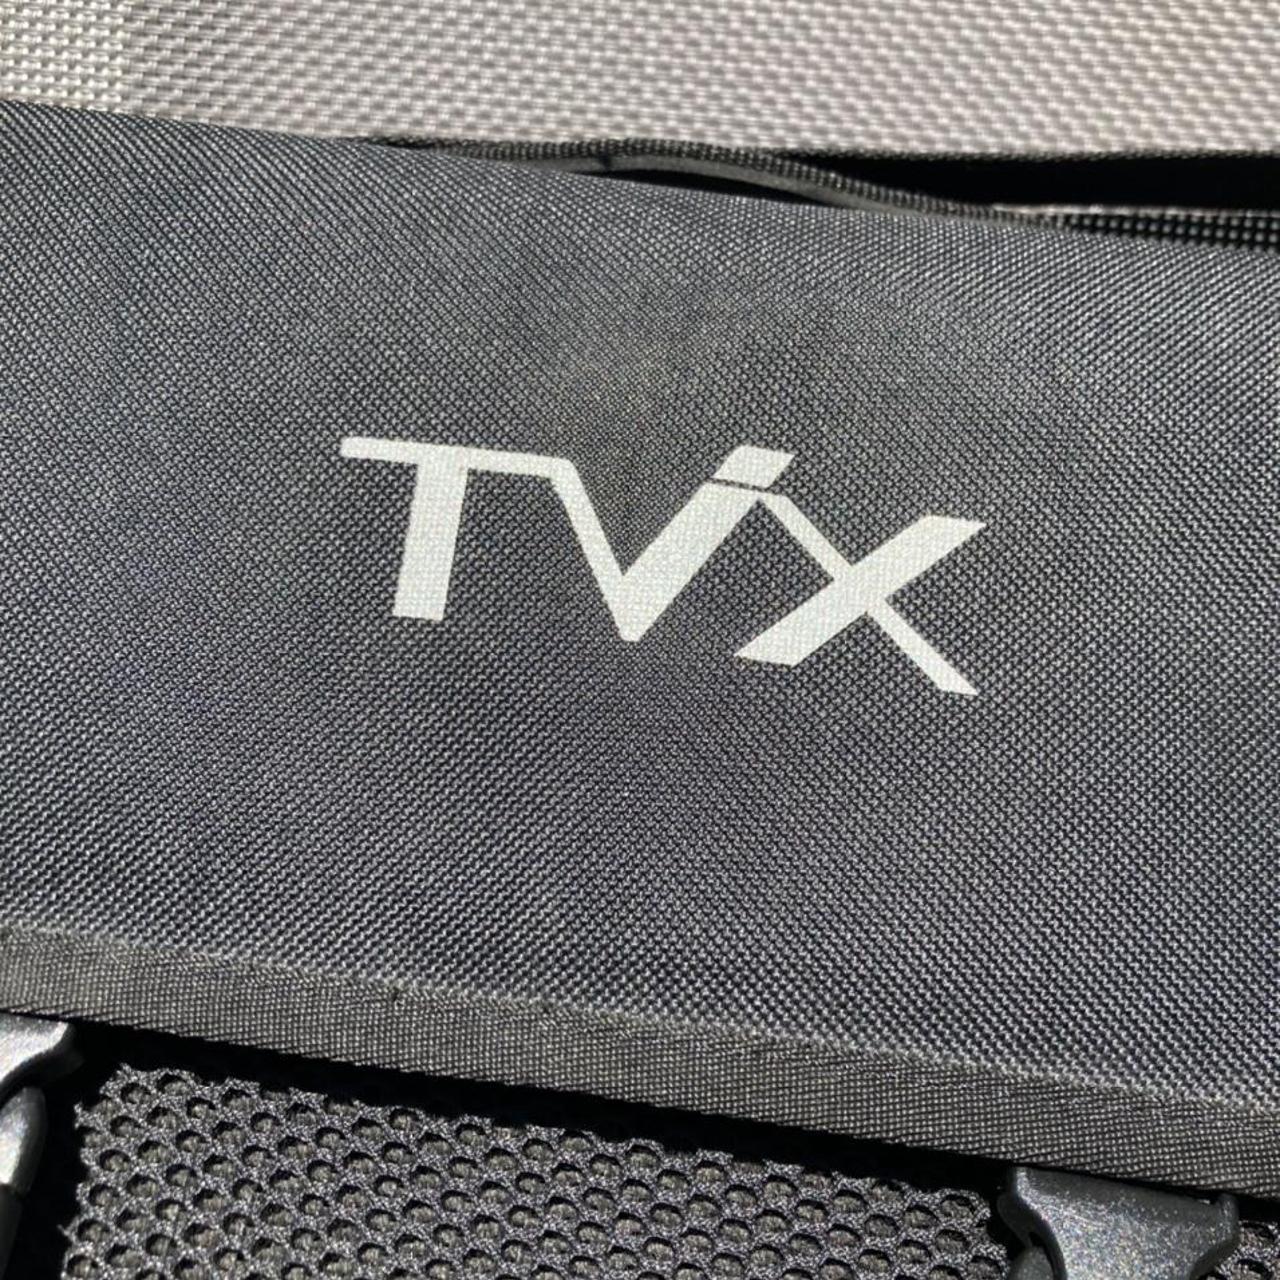 Product Image 2 - TVX Cross Body

-10/10 condition 
-light